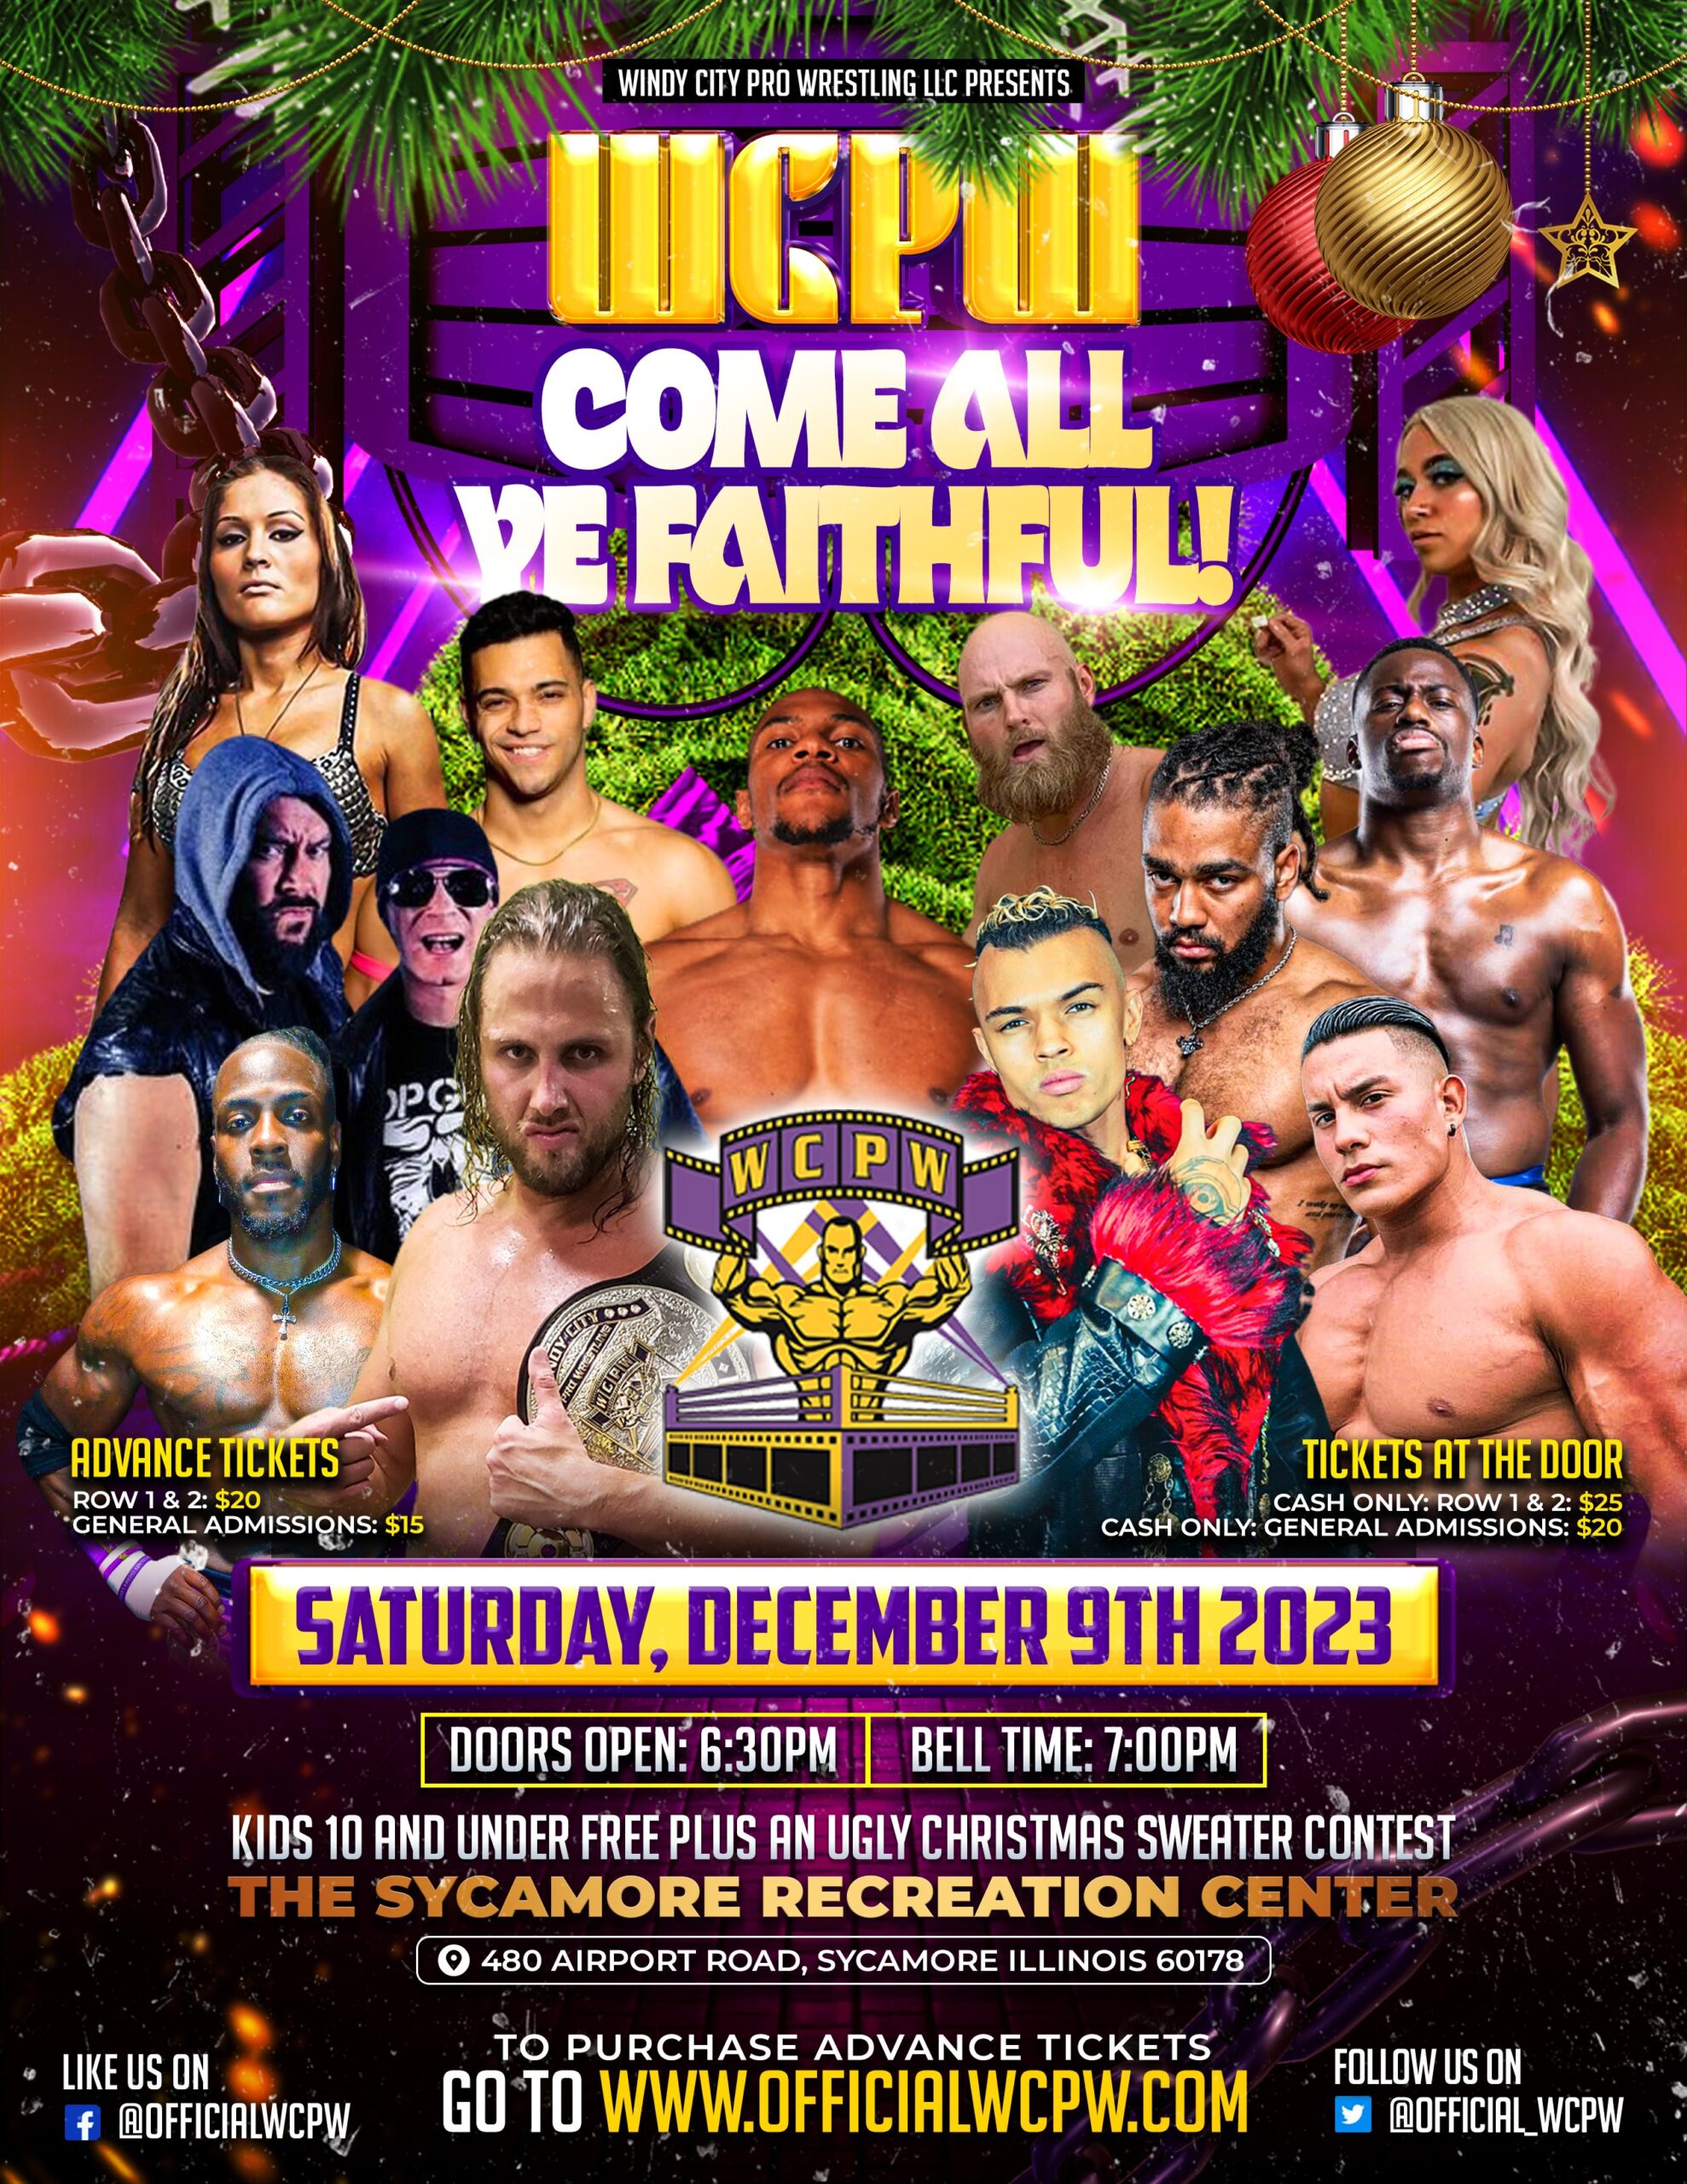 WCPW “Come All Ye Faithful” Saturday December 9th, 2023